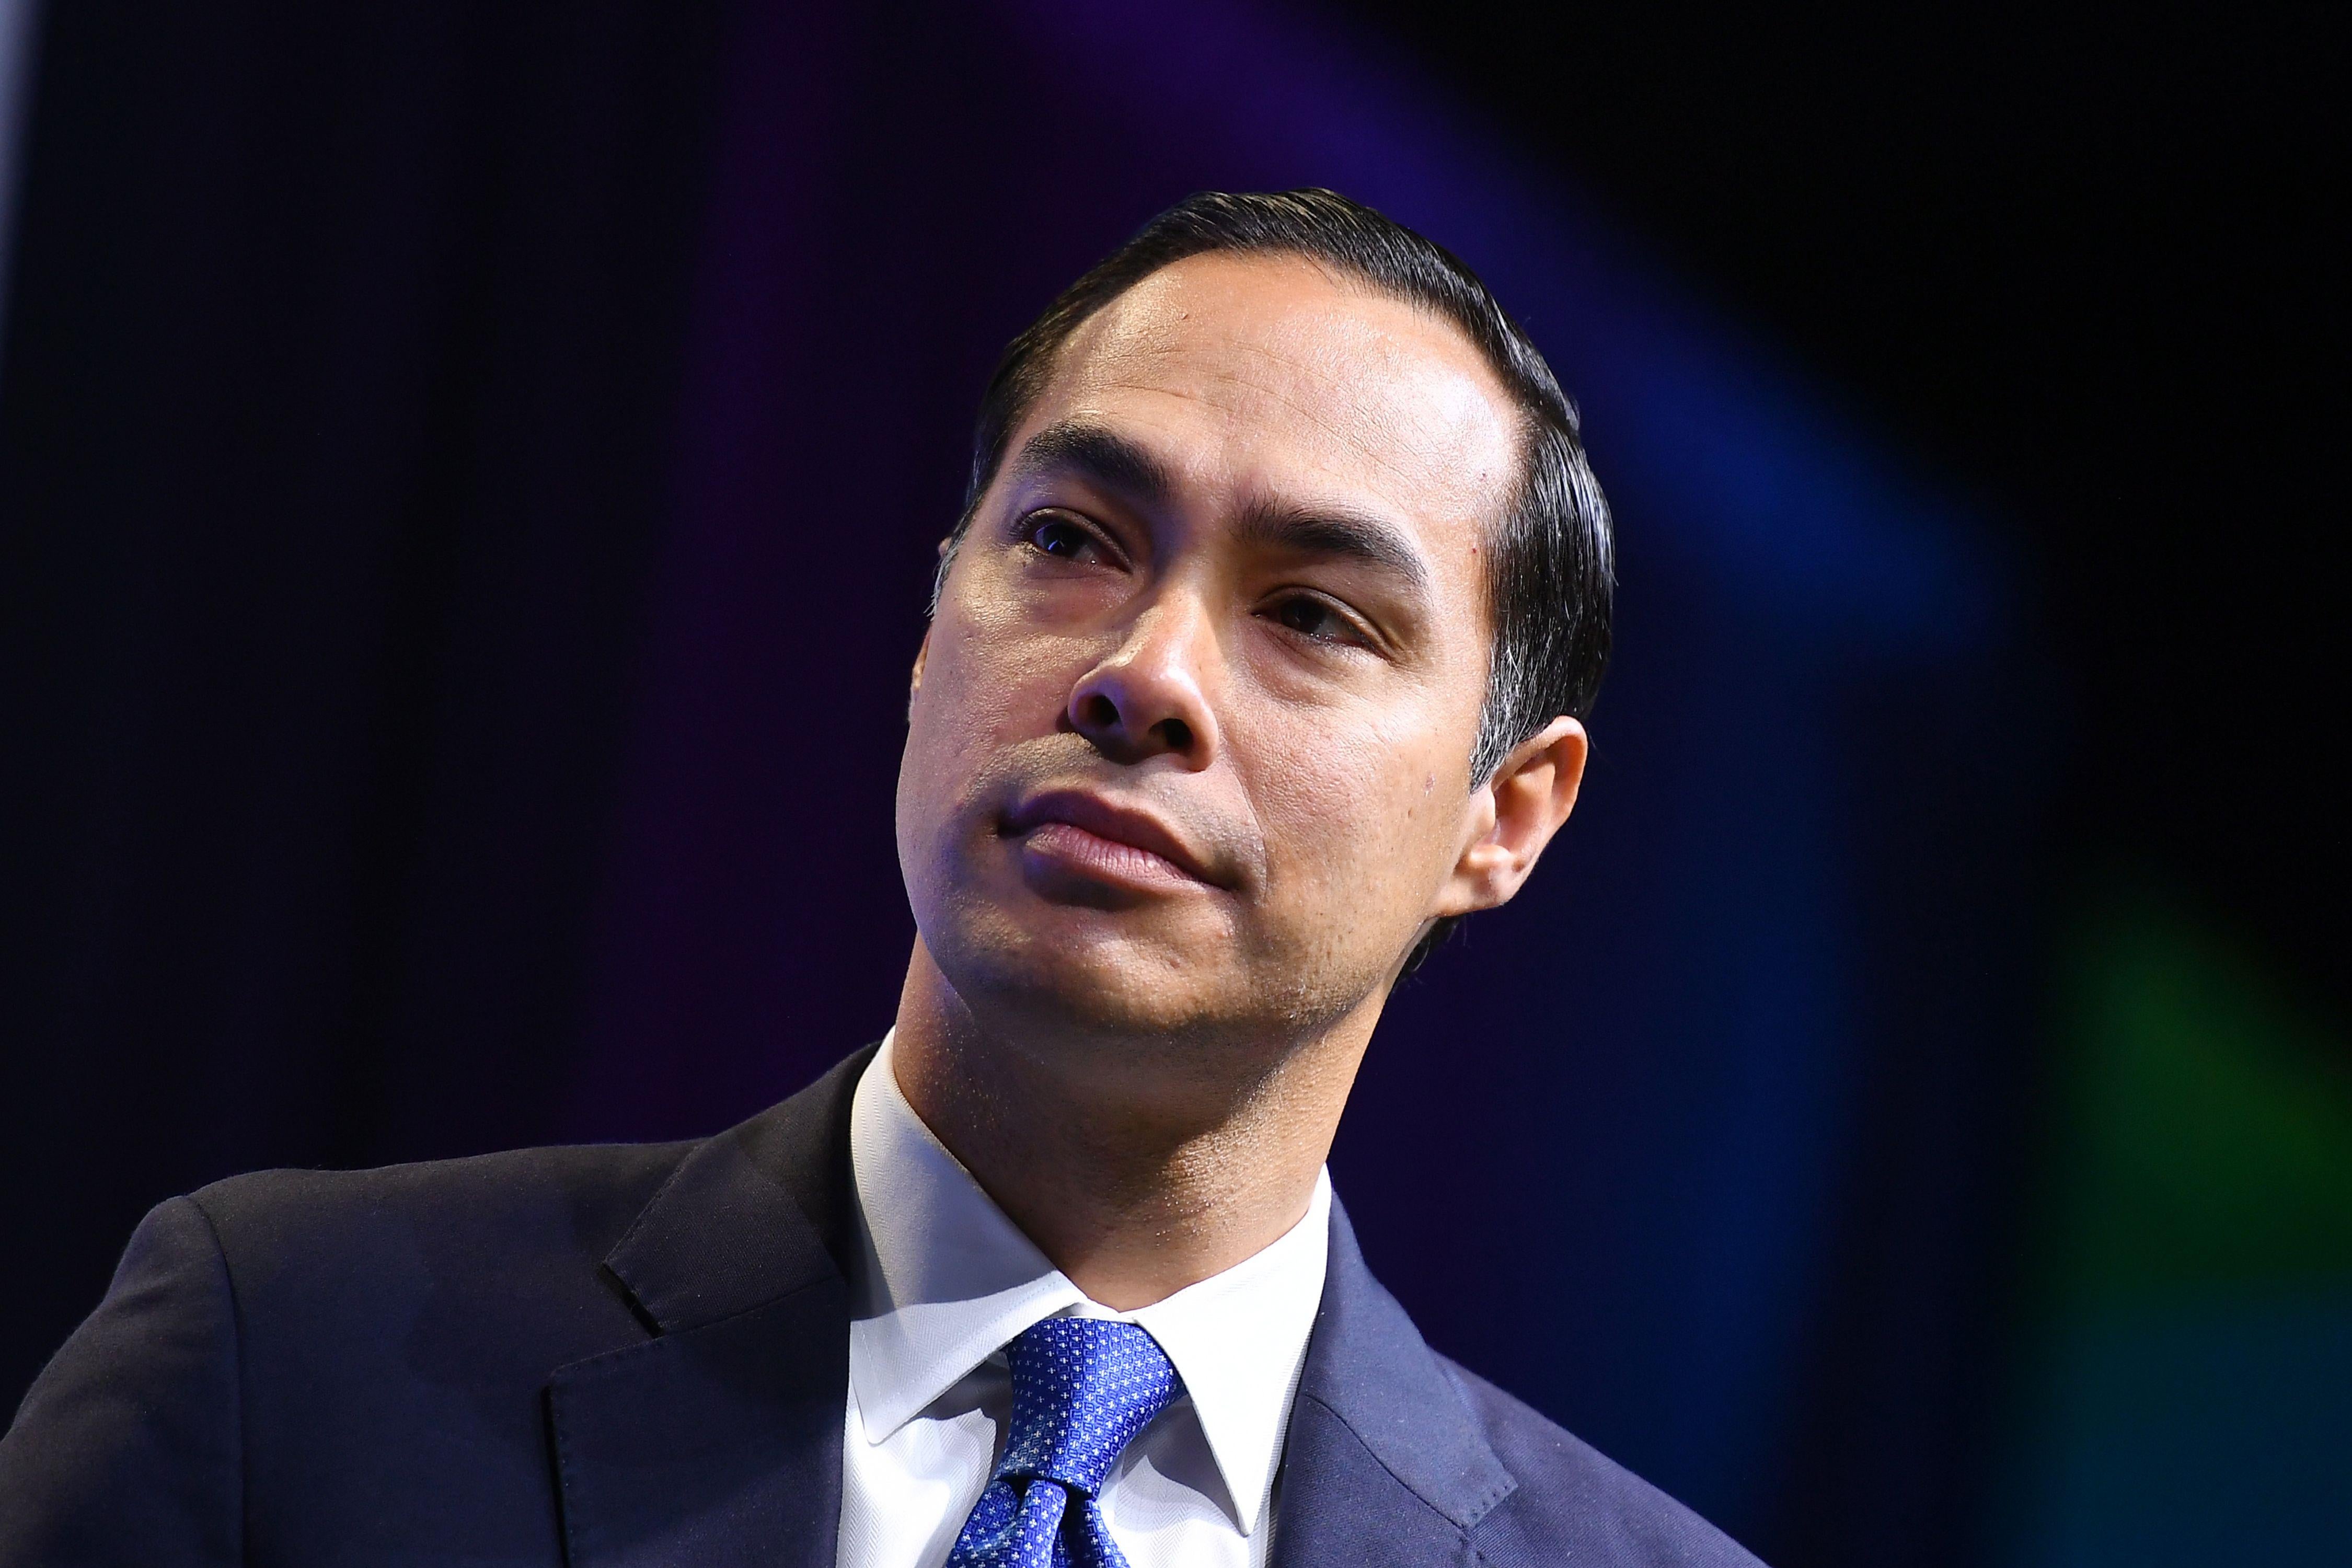 Julián Castro looks thoughtfully off to the right. He appears to be standing on a stage.